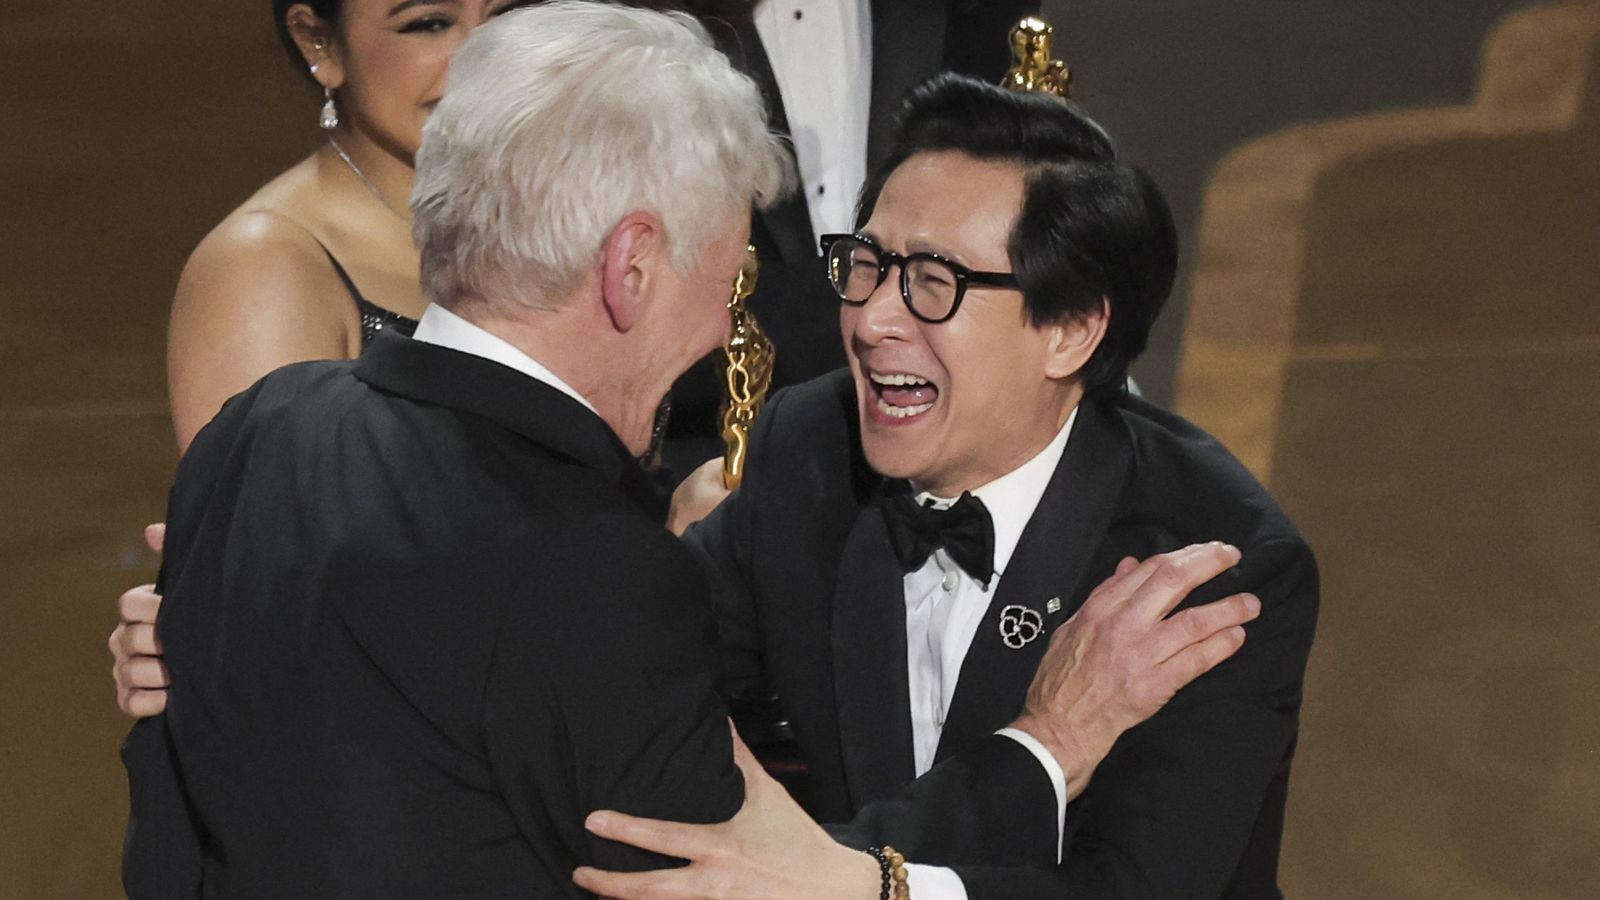 Everything Everywhere All At Once makes Oscars history as the night's biggest winner